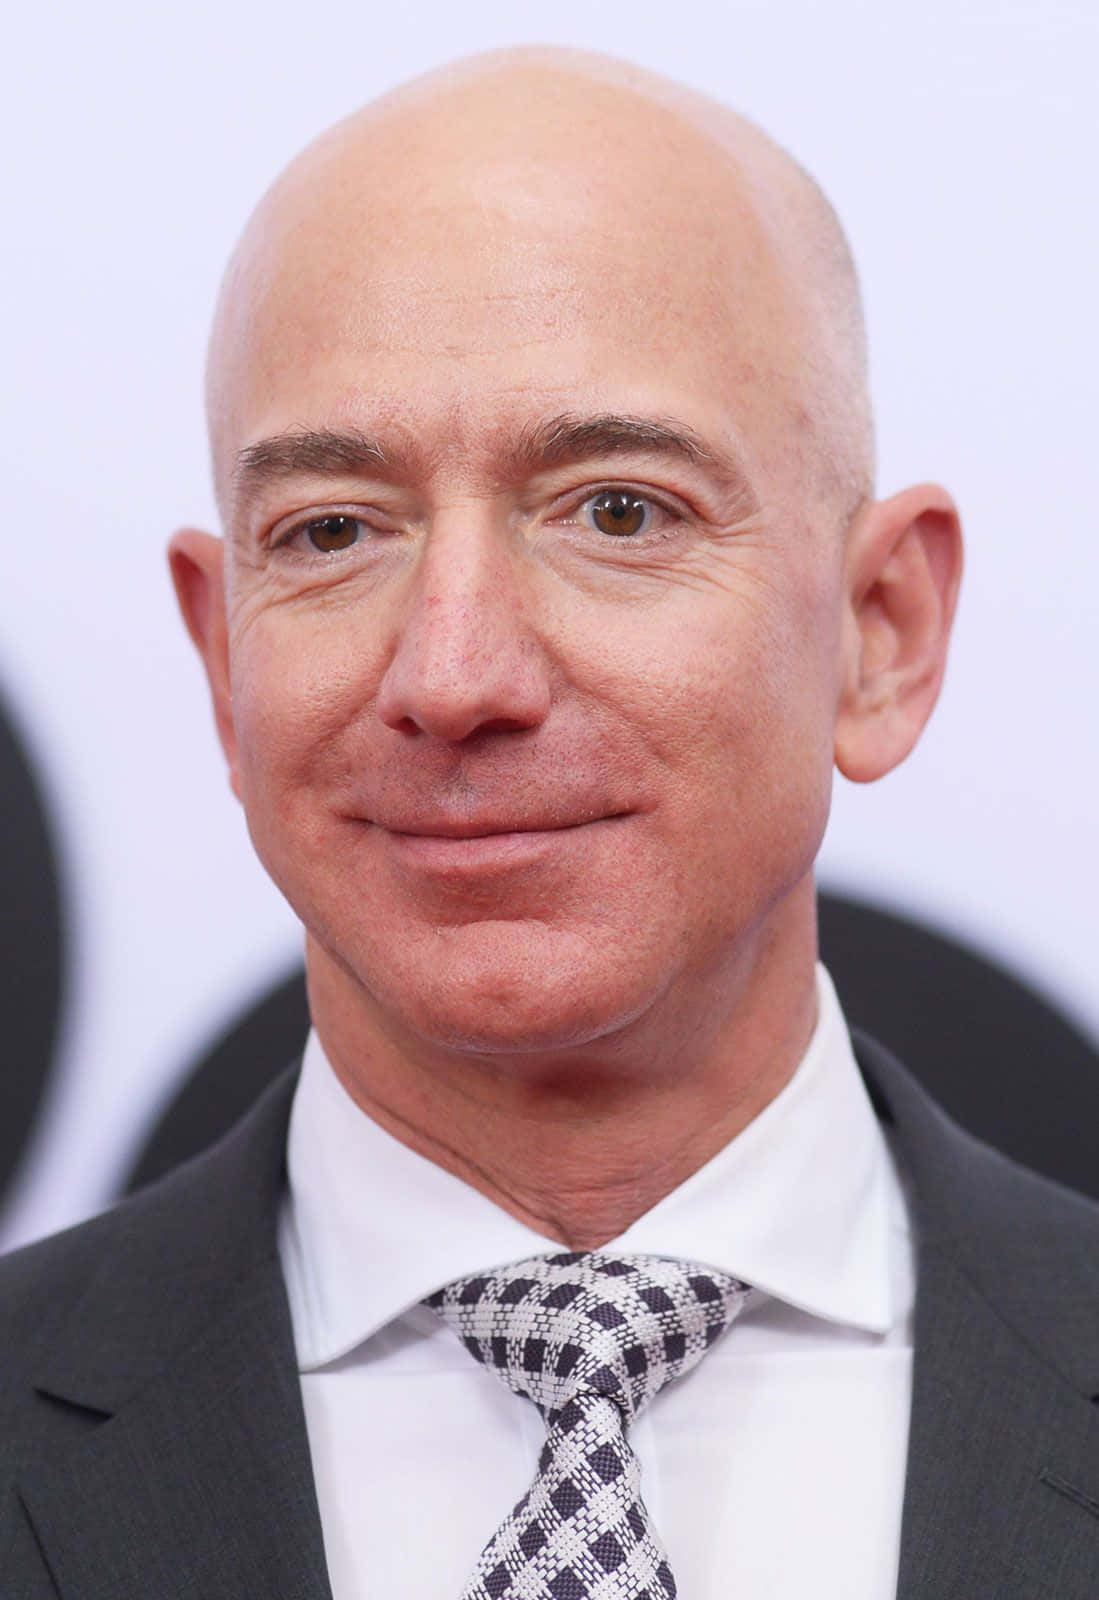 Jeff Bezos Smiling during an Event